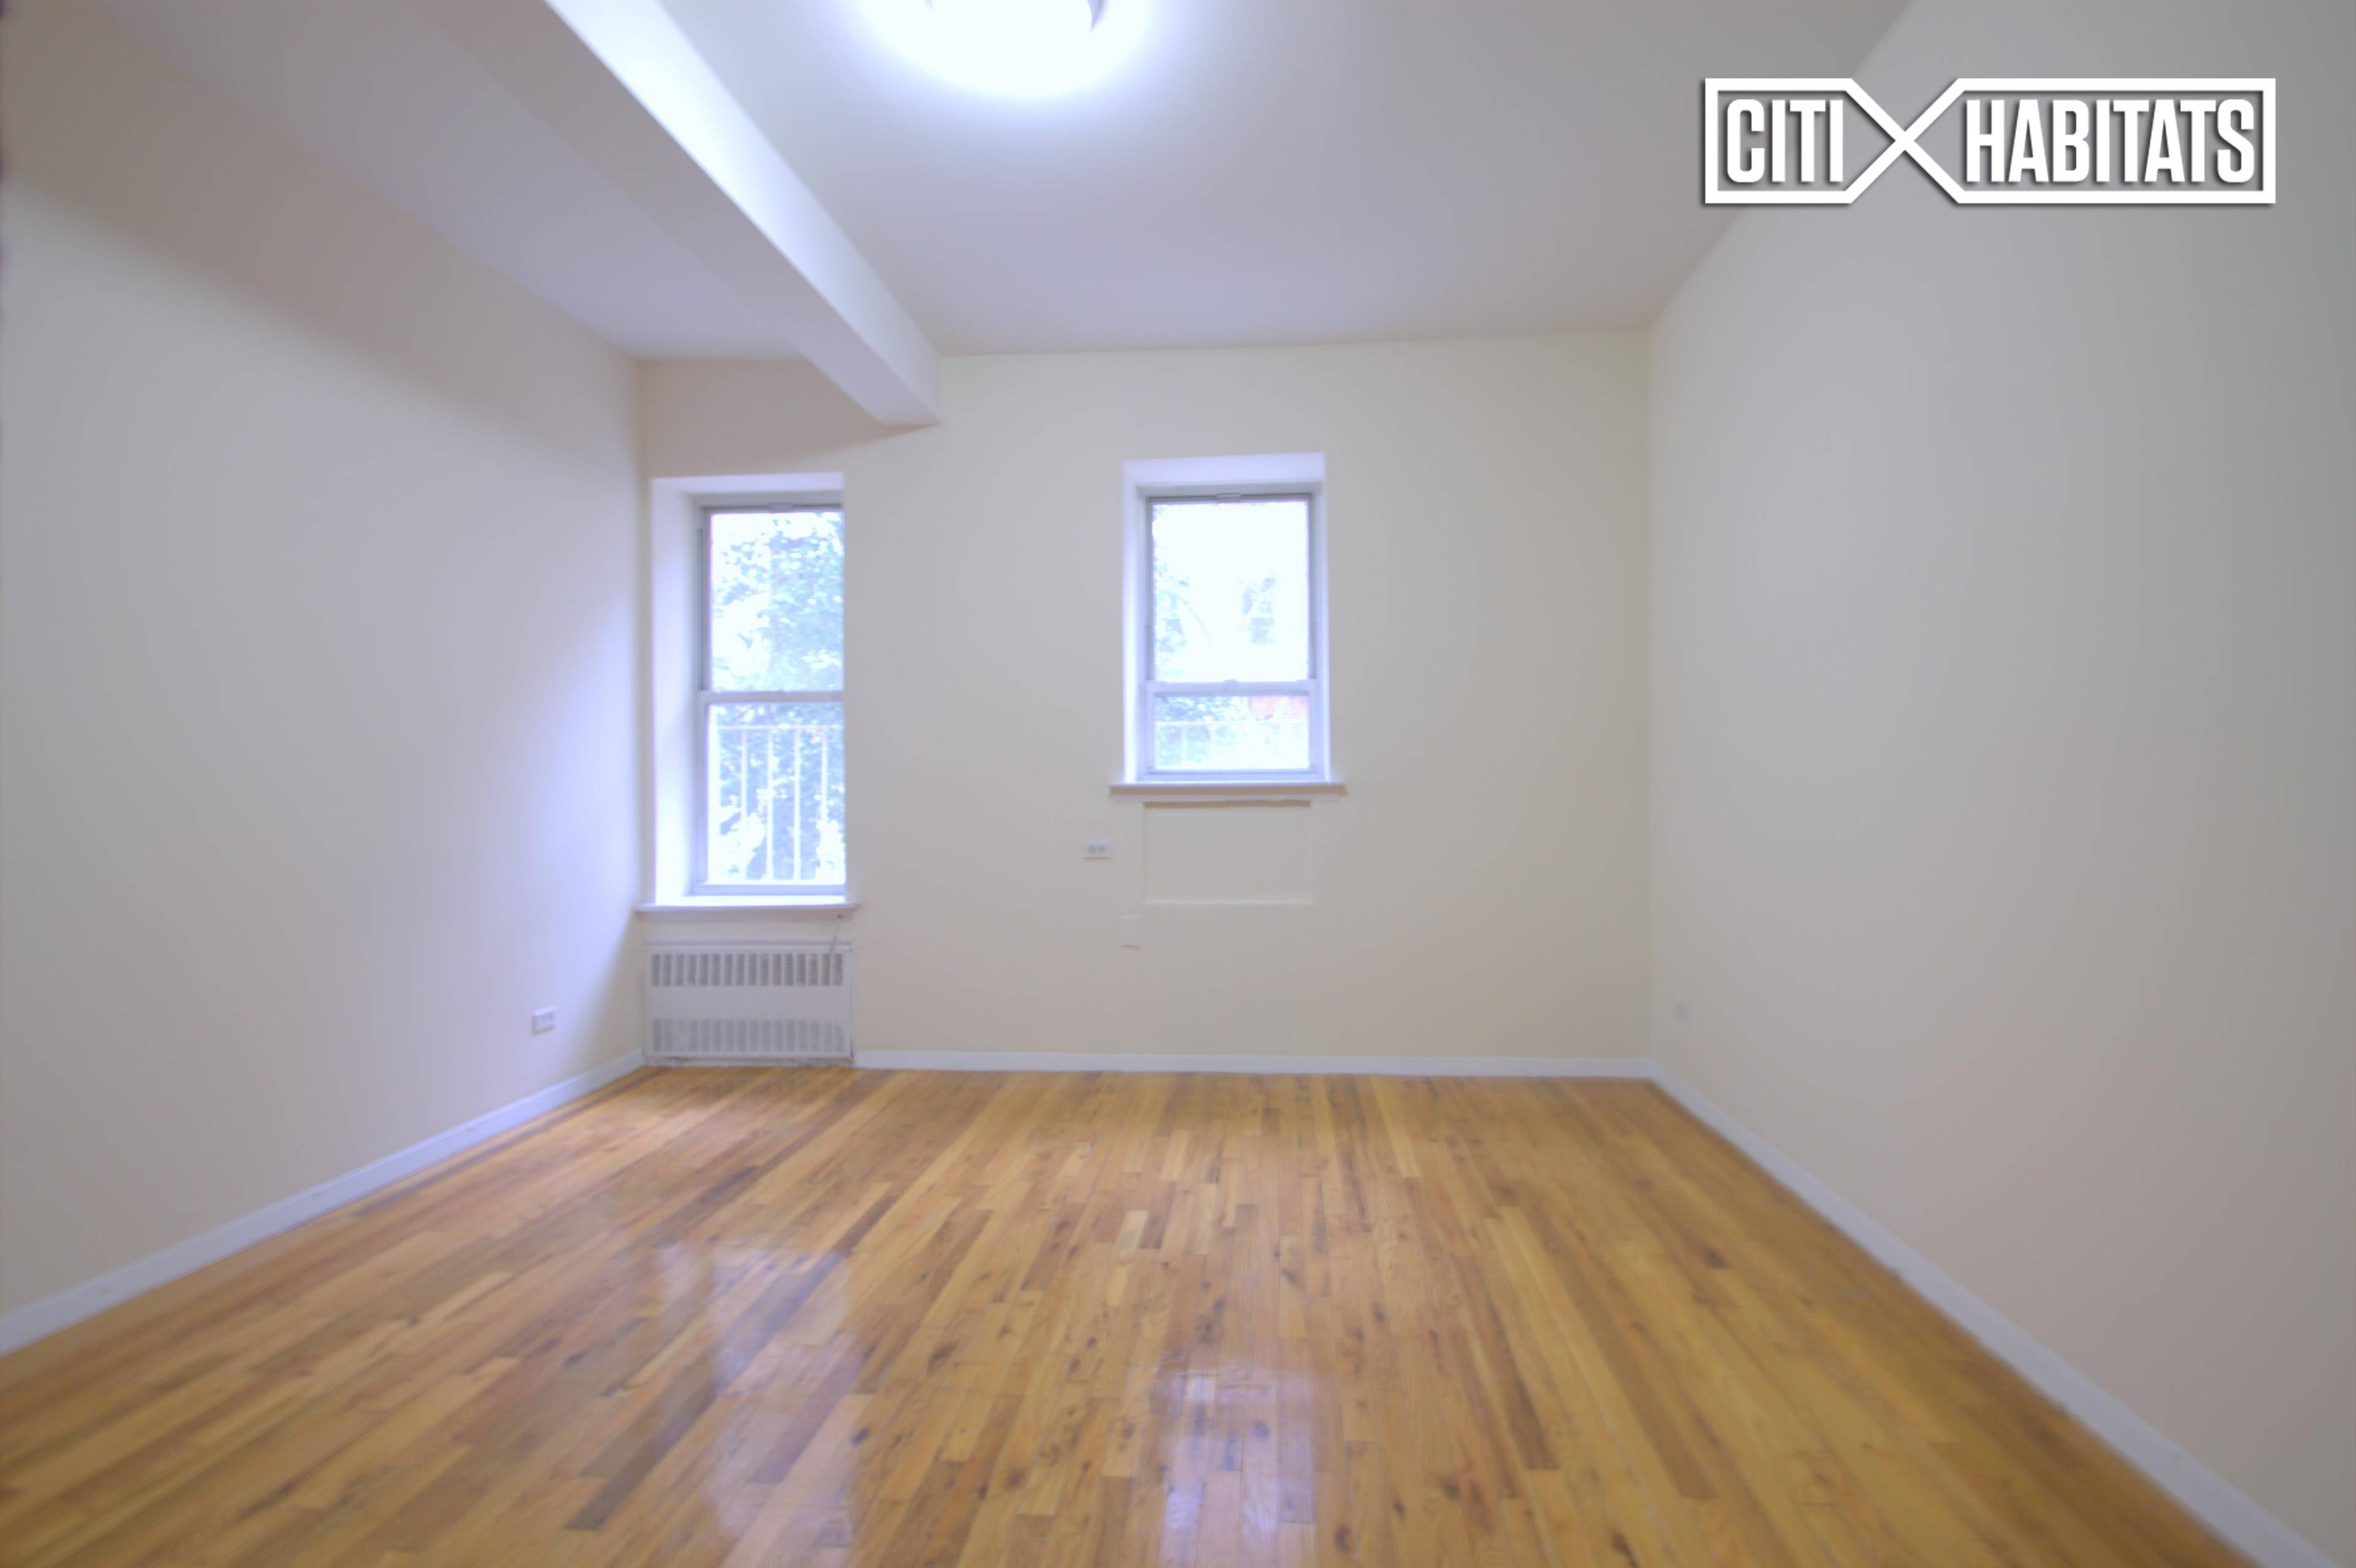 Email for our OPEN HOUSE By Appointment only 144 East 22nd Street, Apt 2C One Bedroom with Over Sized Living Room plenty of space to convert into a Two Bedroom.